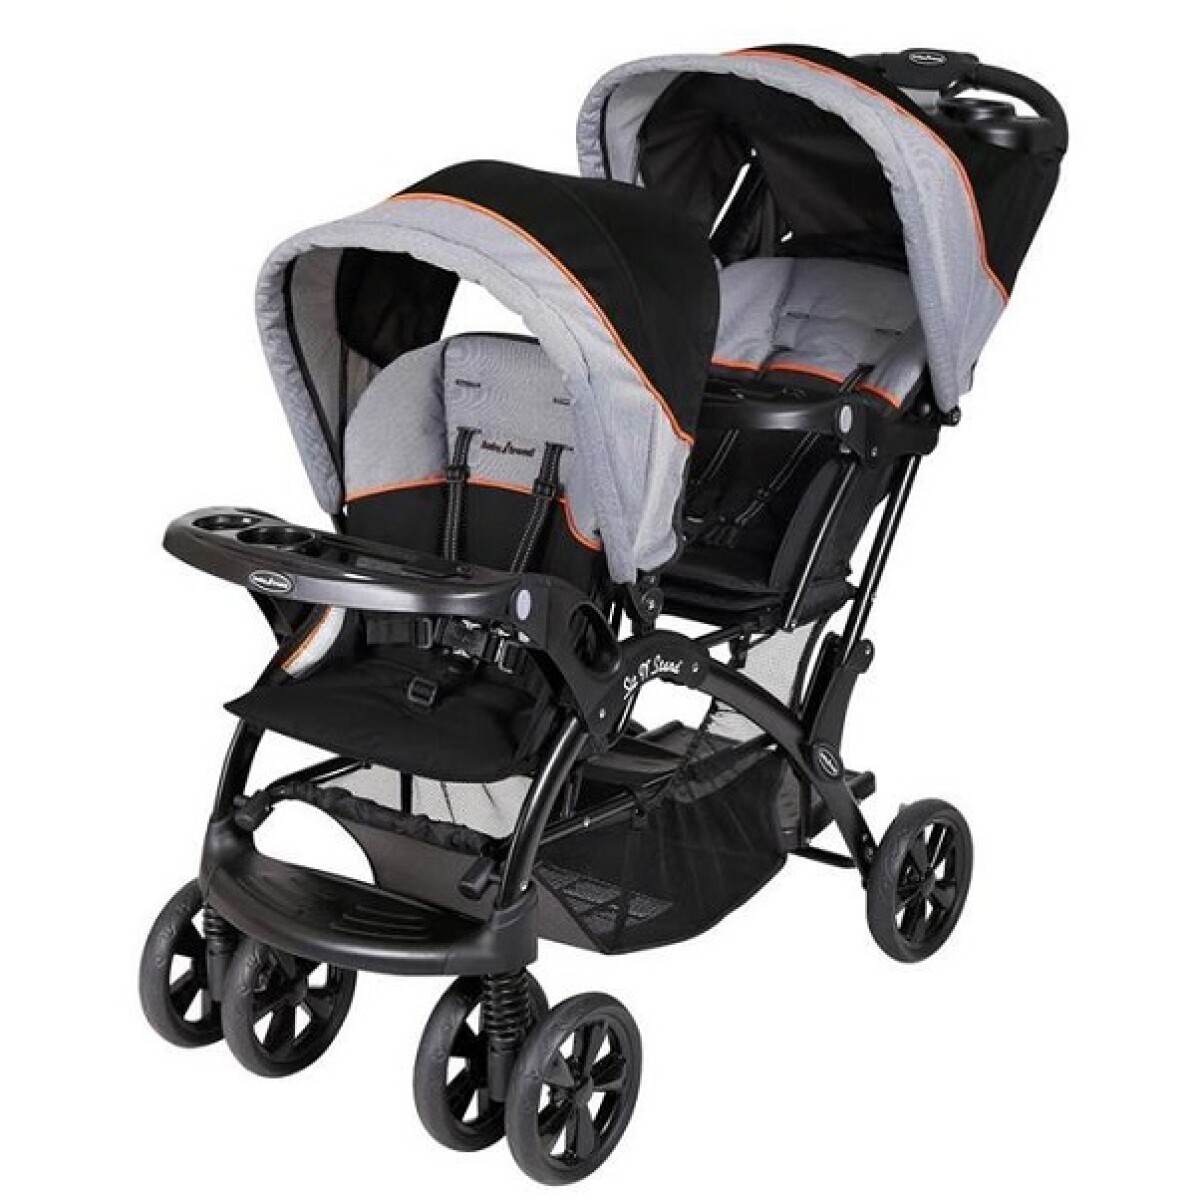 Coche Babytrend Doble Sit&stand 